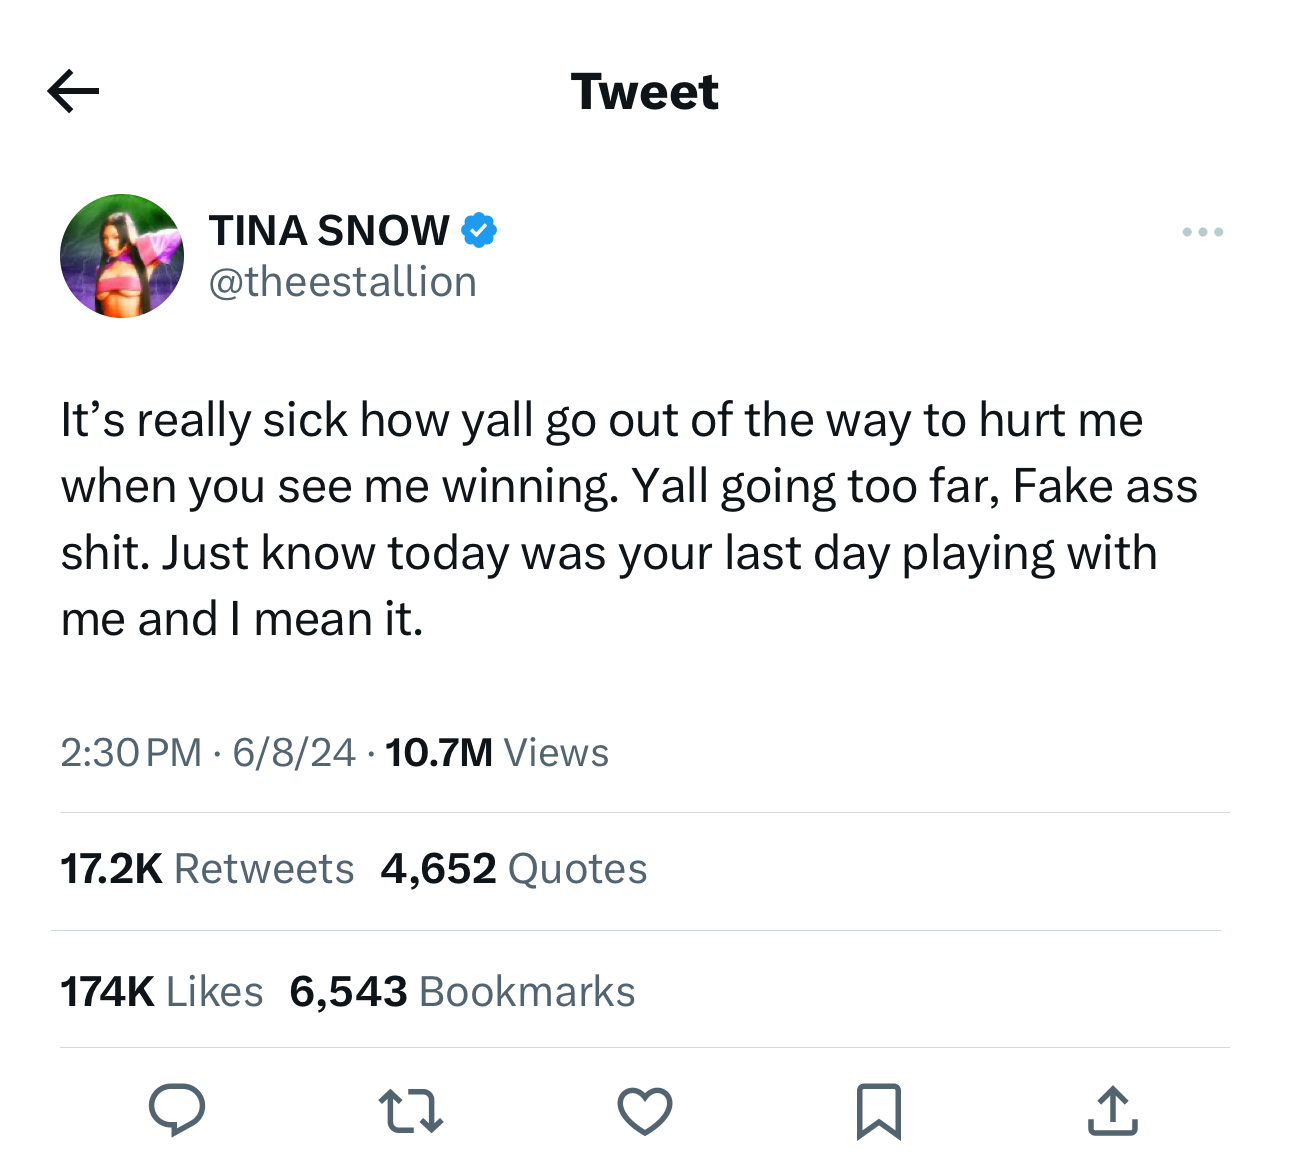 Tweet by Tina Snow (@theestallion) expressing frustration at being hurt despite her success. Shows engagement metrics: 17.2K retweets, 4,652 quotes, 174K likes, 6,543 bookmarks